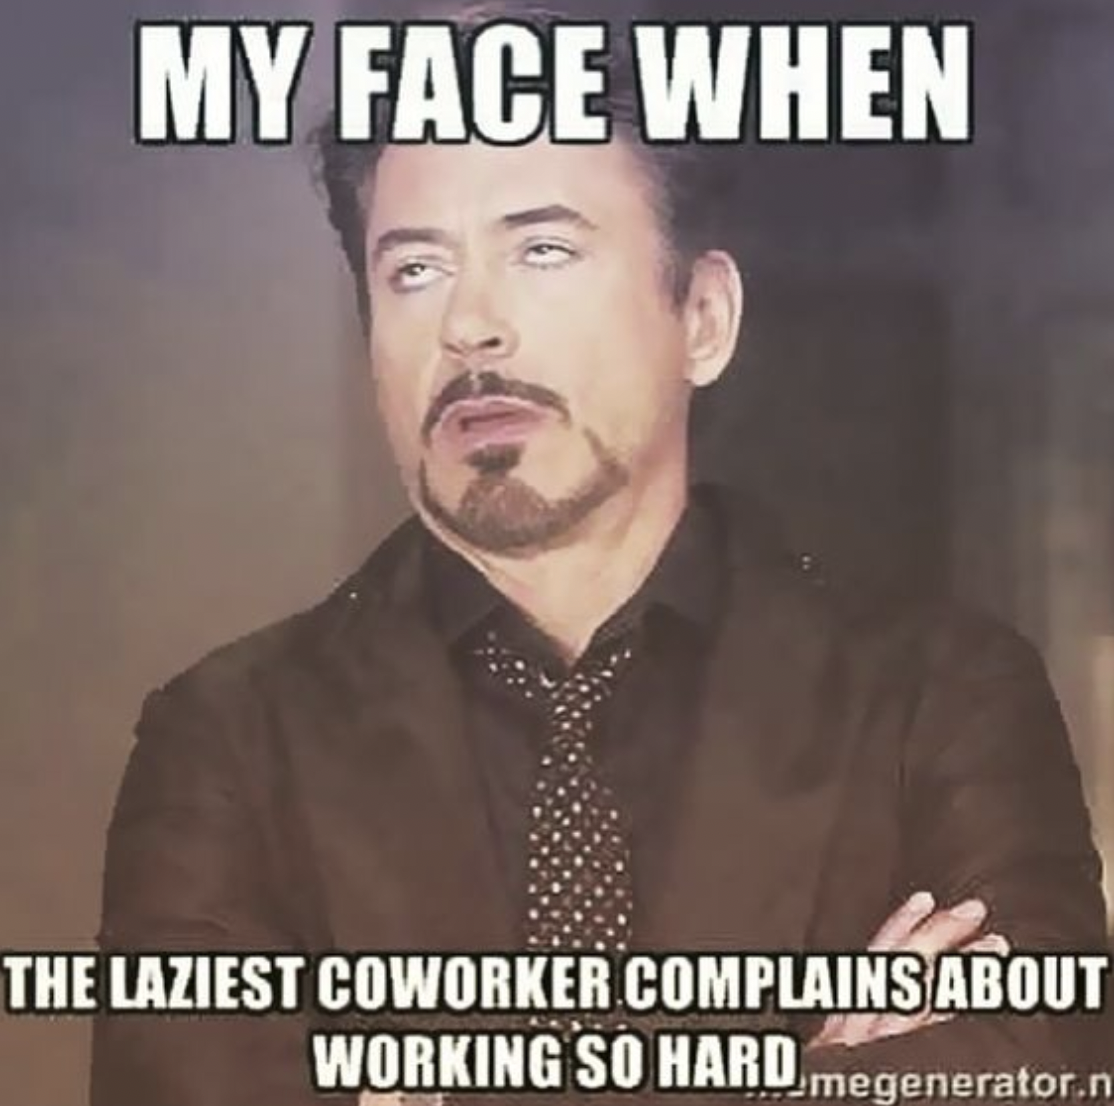 work memes - My Face When The Laziest Coworker Complains About Working So Hard mege megenerator.n